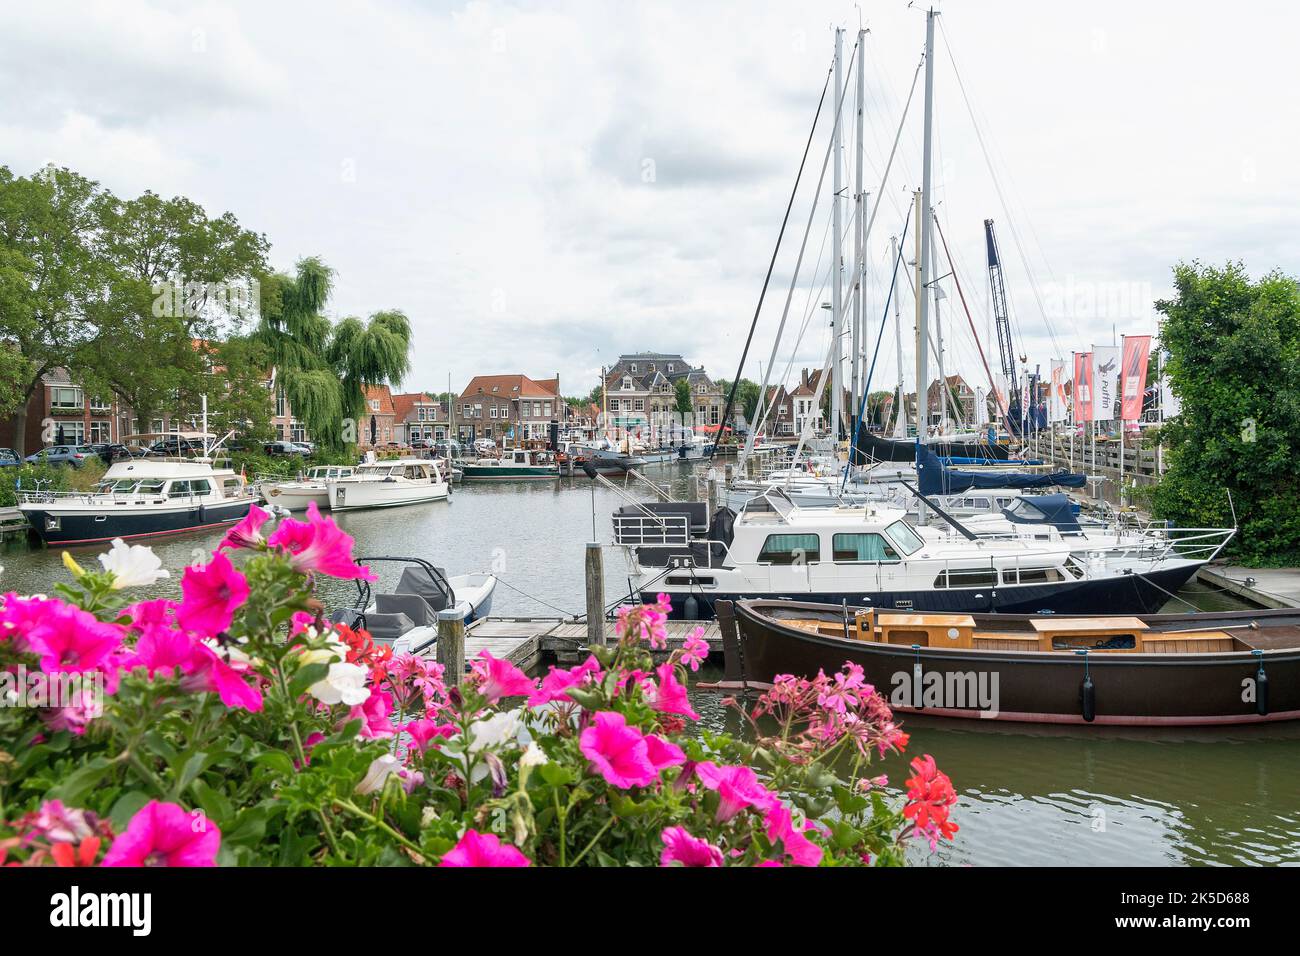 Netherlands, Enkhuizen, old town, Oude Haven, harbor Stock Photo